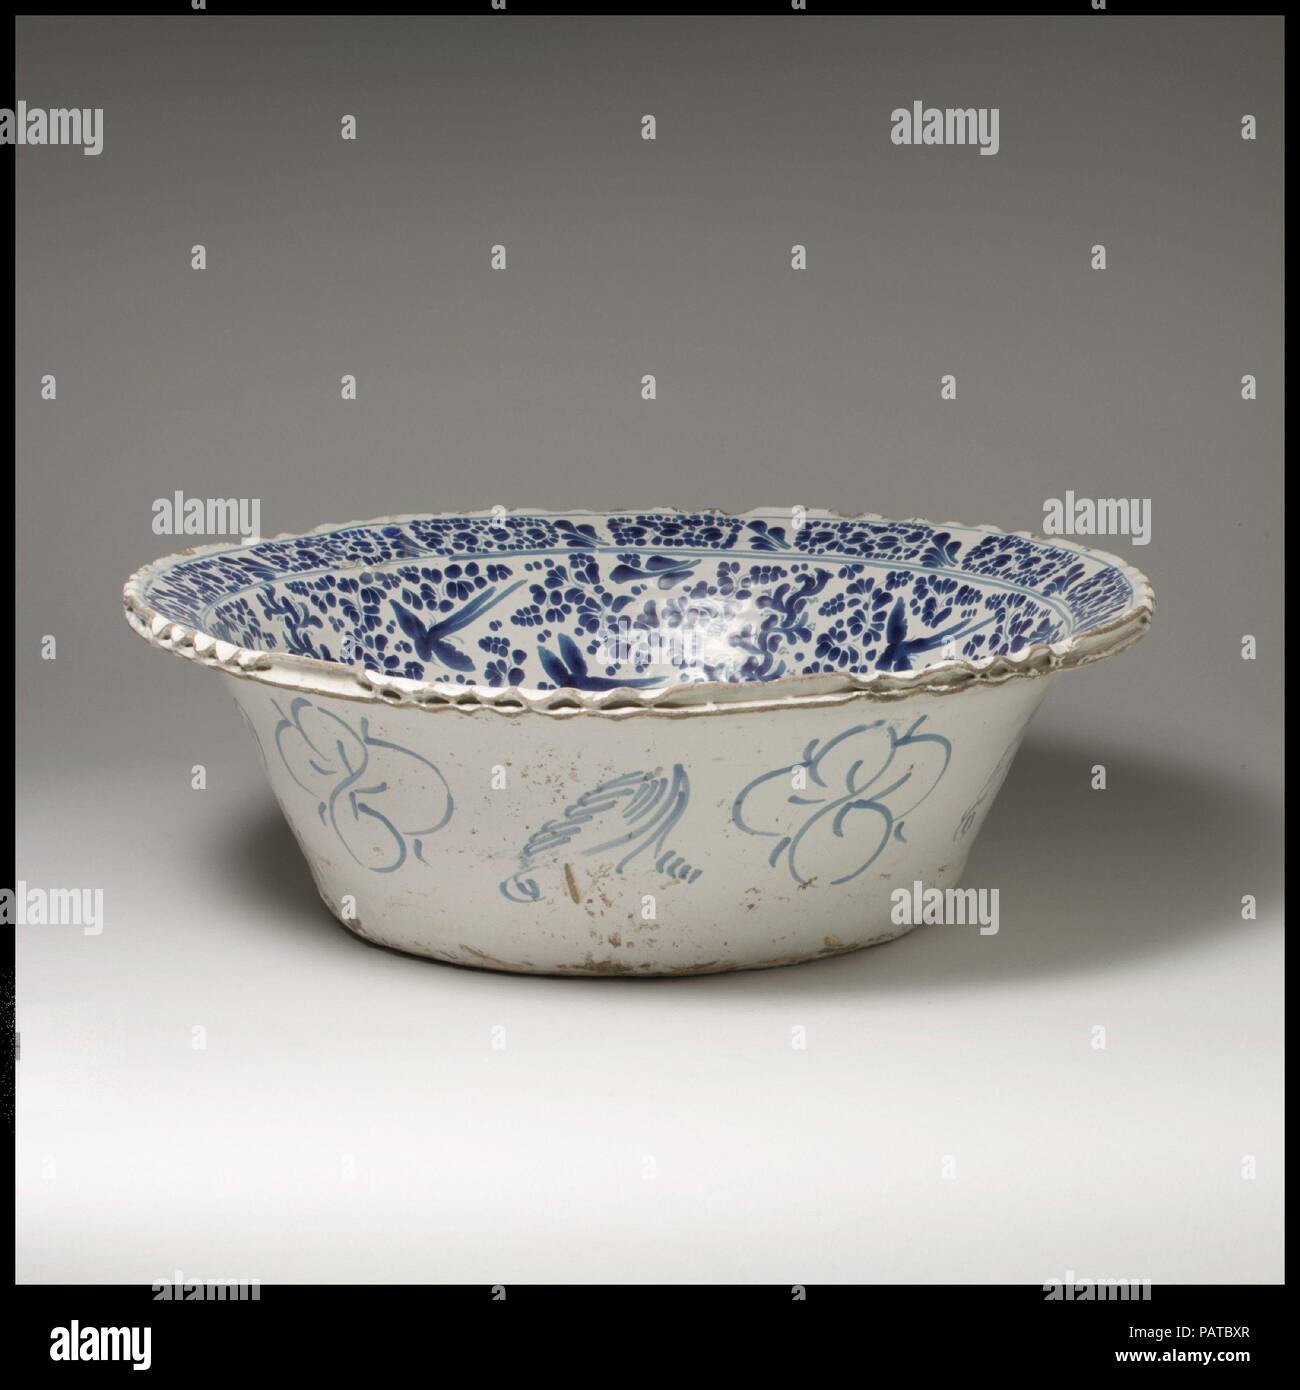 Basin. Culture: Mexican. Dimensions: H. 6 1/2 in. (16.5 cm); Diam. 20 1/4 in. (51.4 cm). Maker: Attributed to Damián Hernández (Mexican, active 1607-70). Date: 1660-80.  The shape of this type of basin, called a lebrillo, is rooted in Hispano-Islamic ceramic traditions.  In Mexico, the lebrillo was adapted to a variety of uses, both religious and domestic, often distinguishable by the way in which they are decorated. The interior of this basin, glazed in a technique called aborronado, features a woman in contemporary dress surrounded by birds and a dense pattern of dotted foliate decoration. T Stock Photo